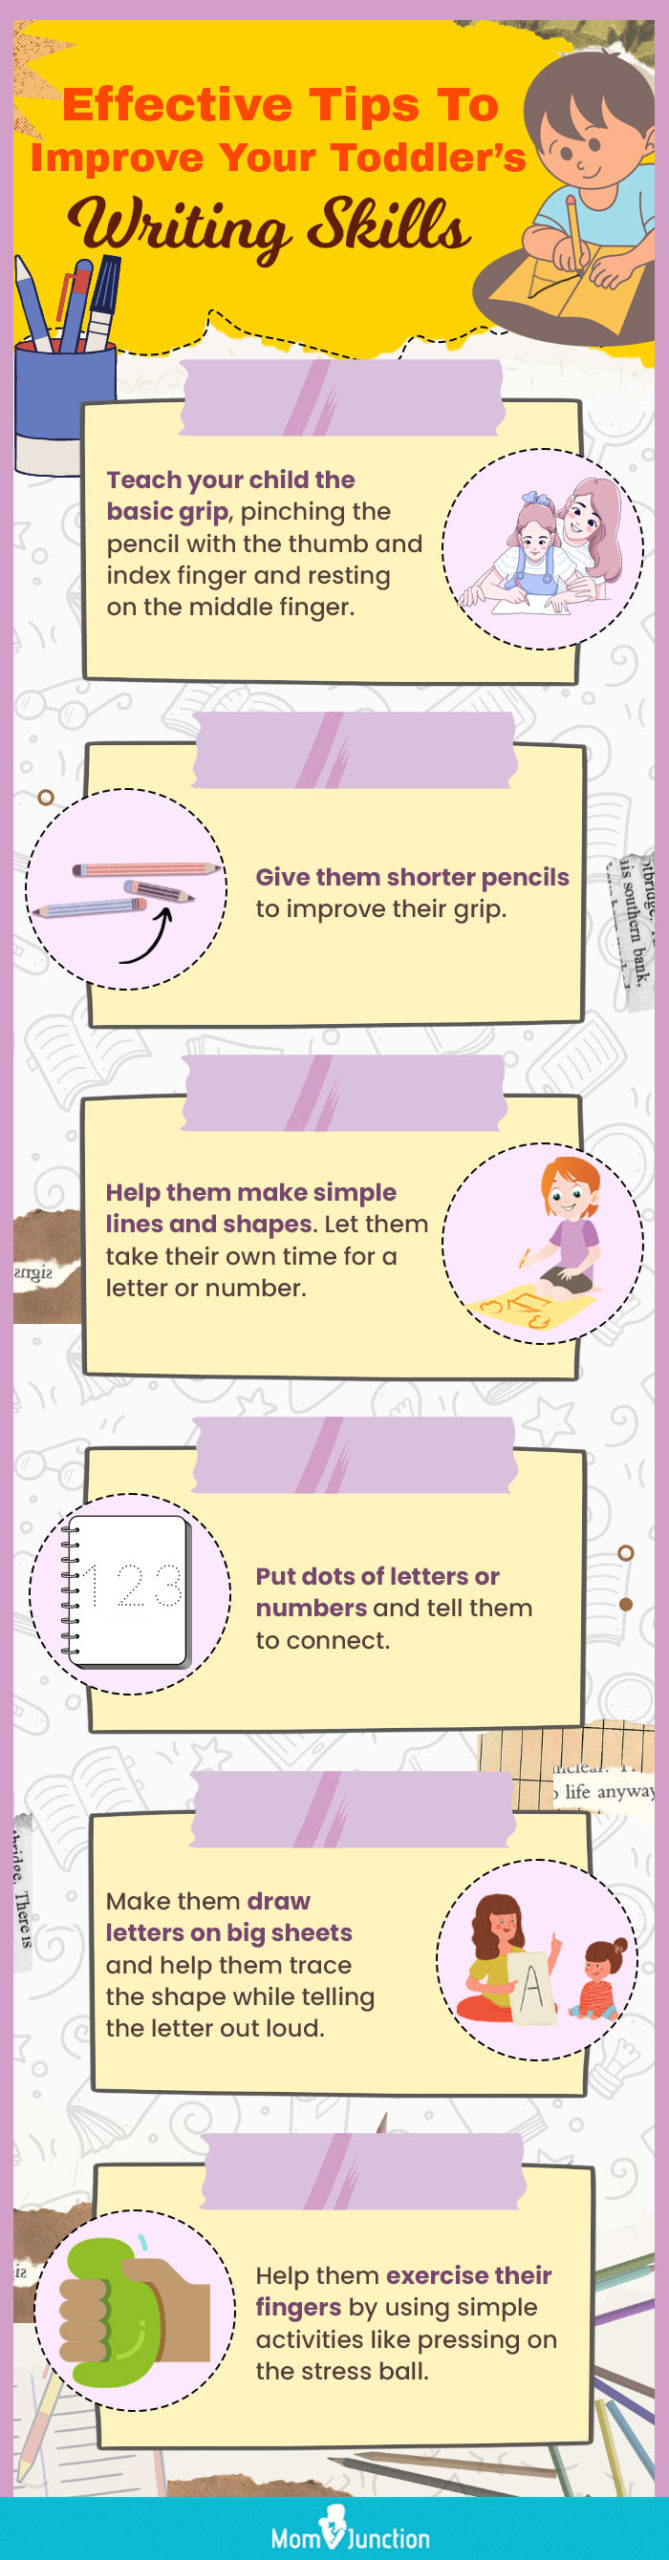 effective tips to improve your toddlers writing skills (infographic)